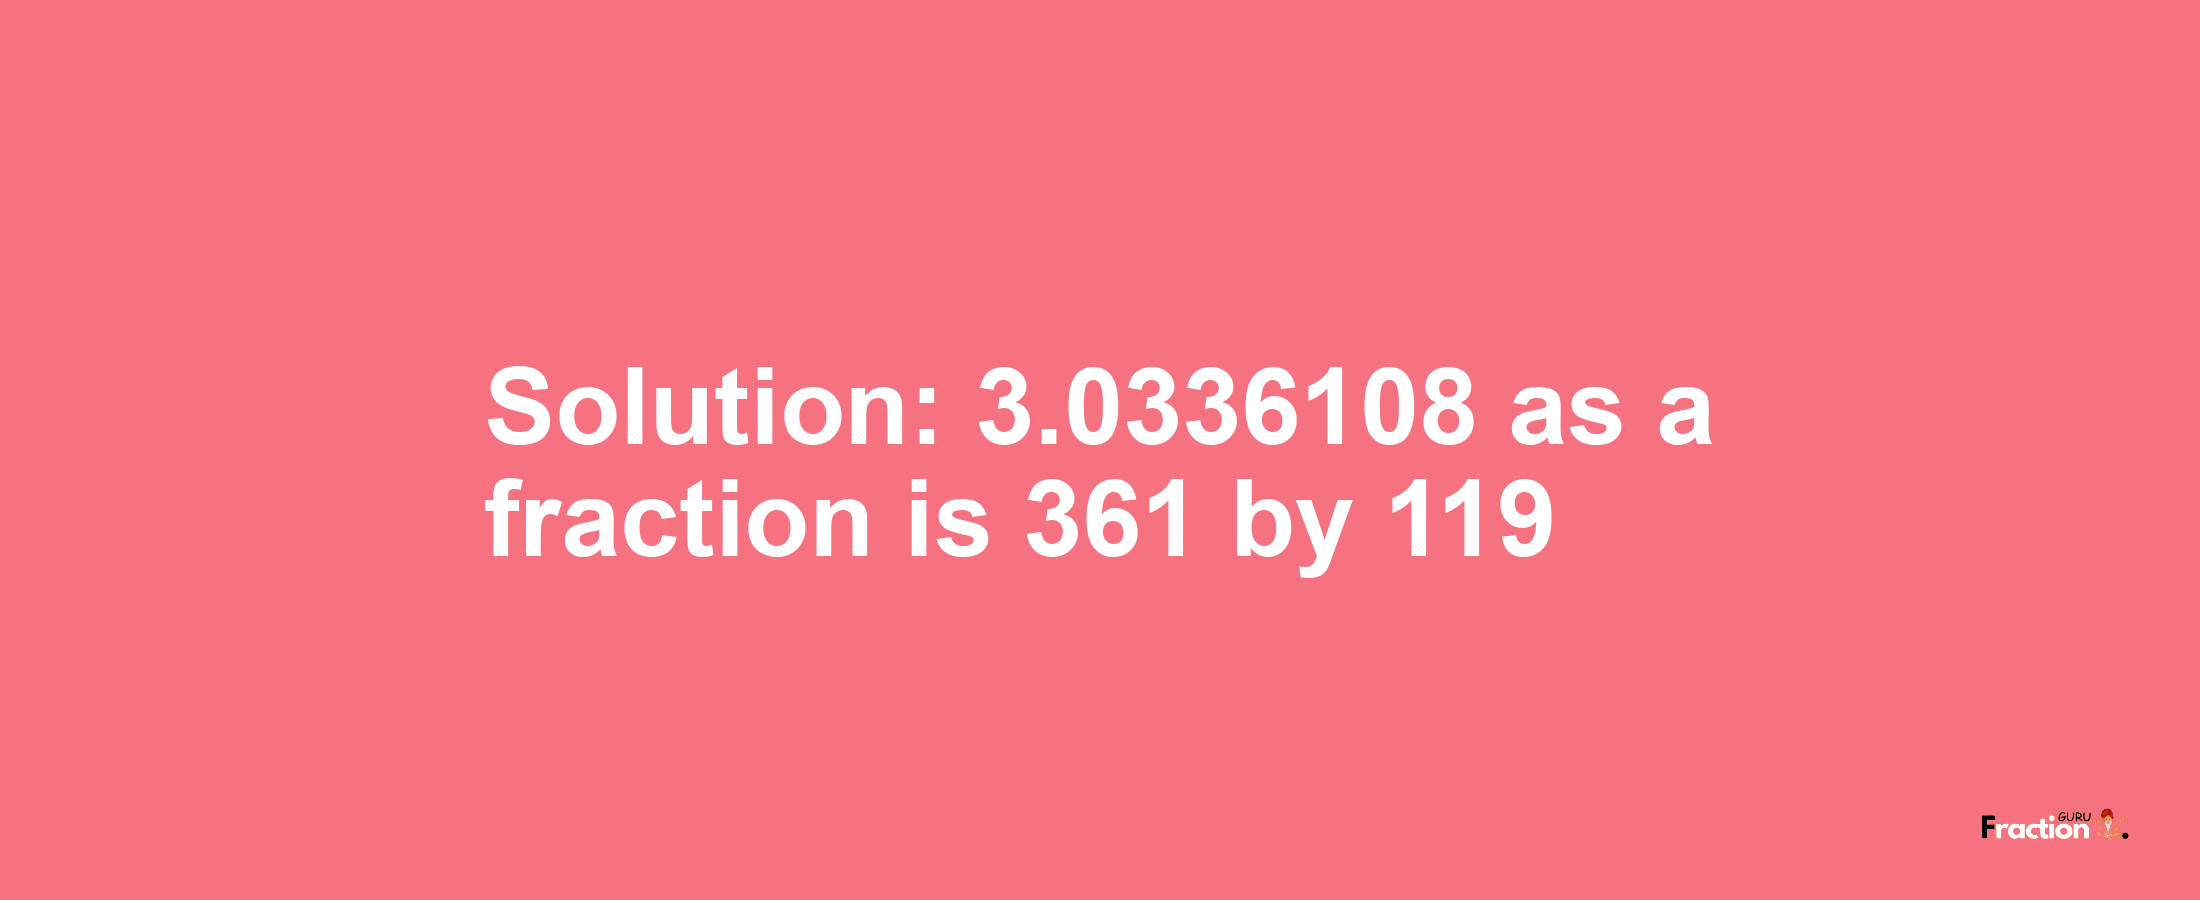 Solution:3.0336108 as a fraction is 361/119